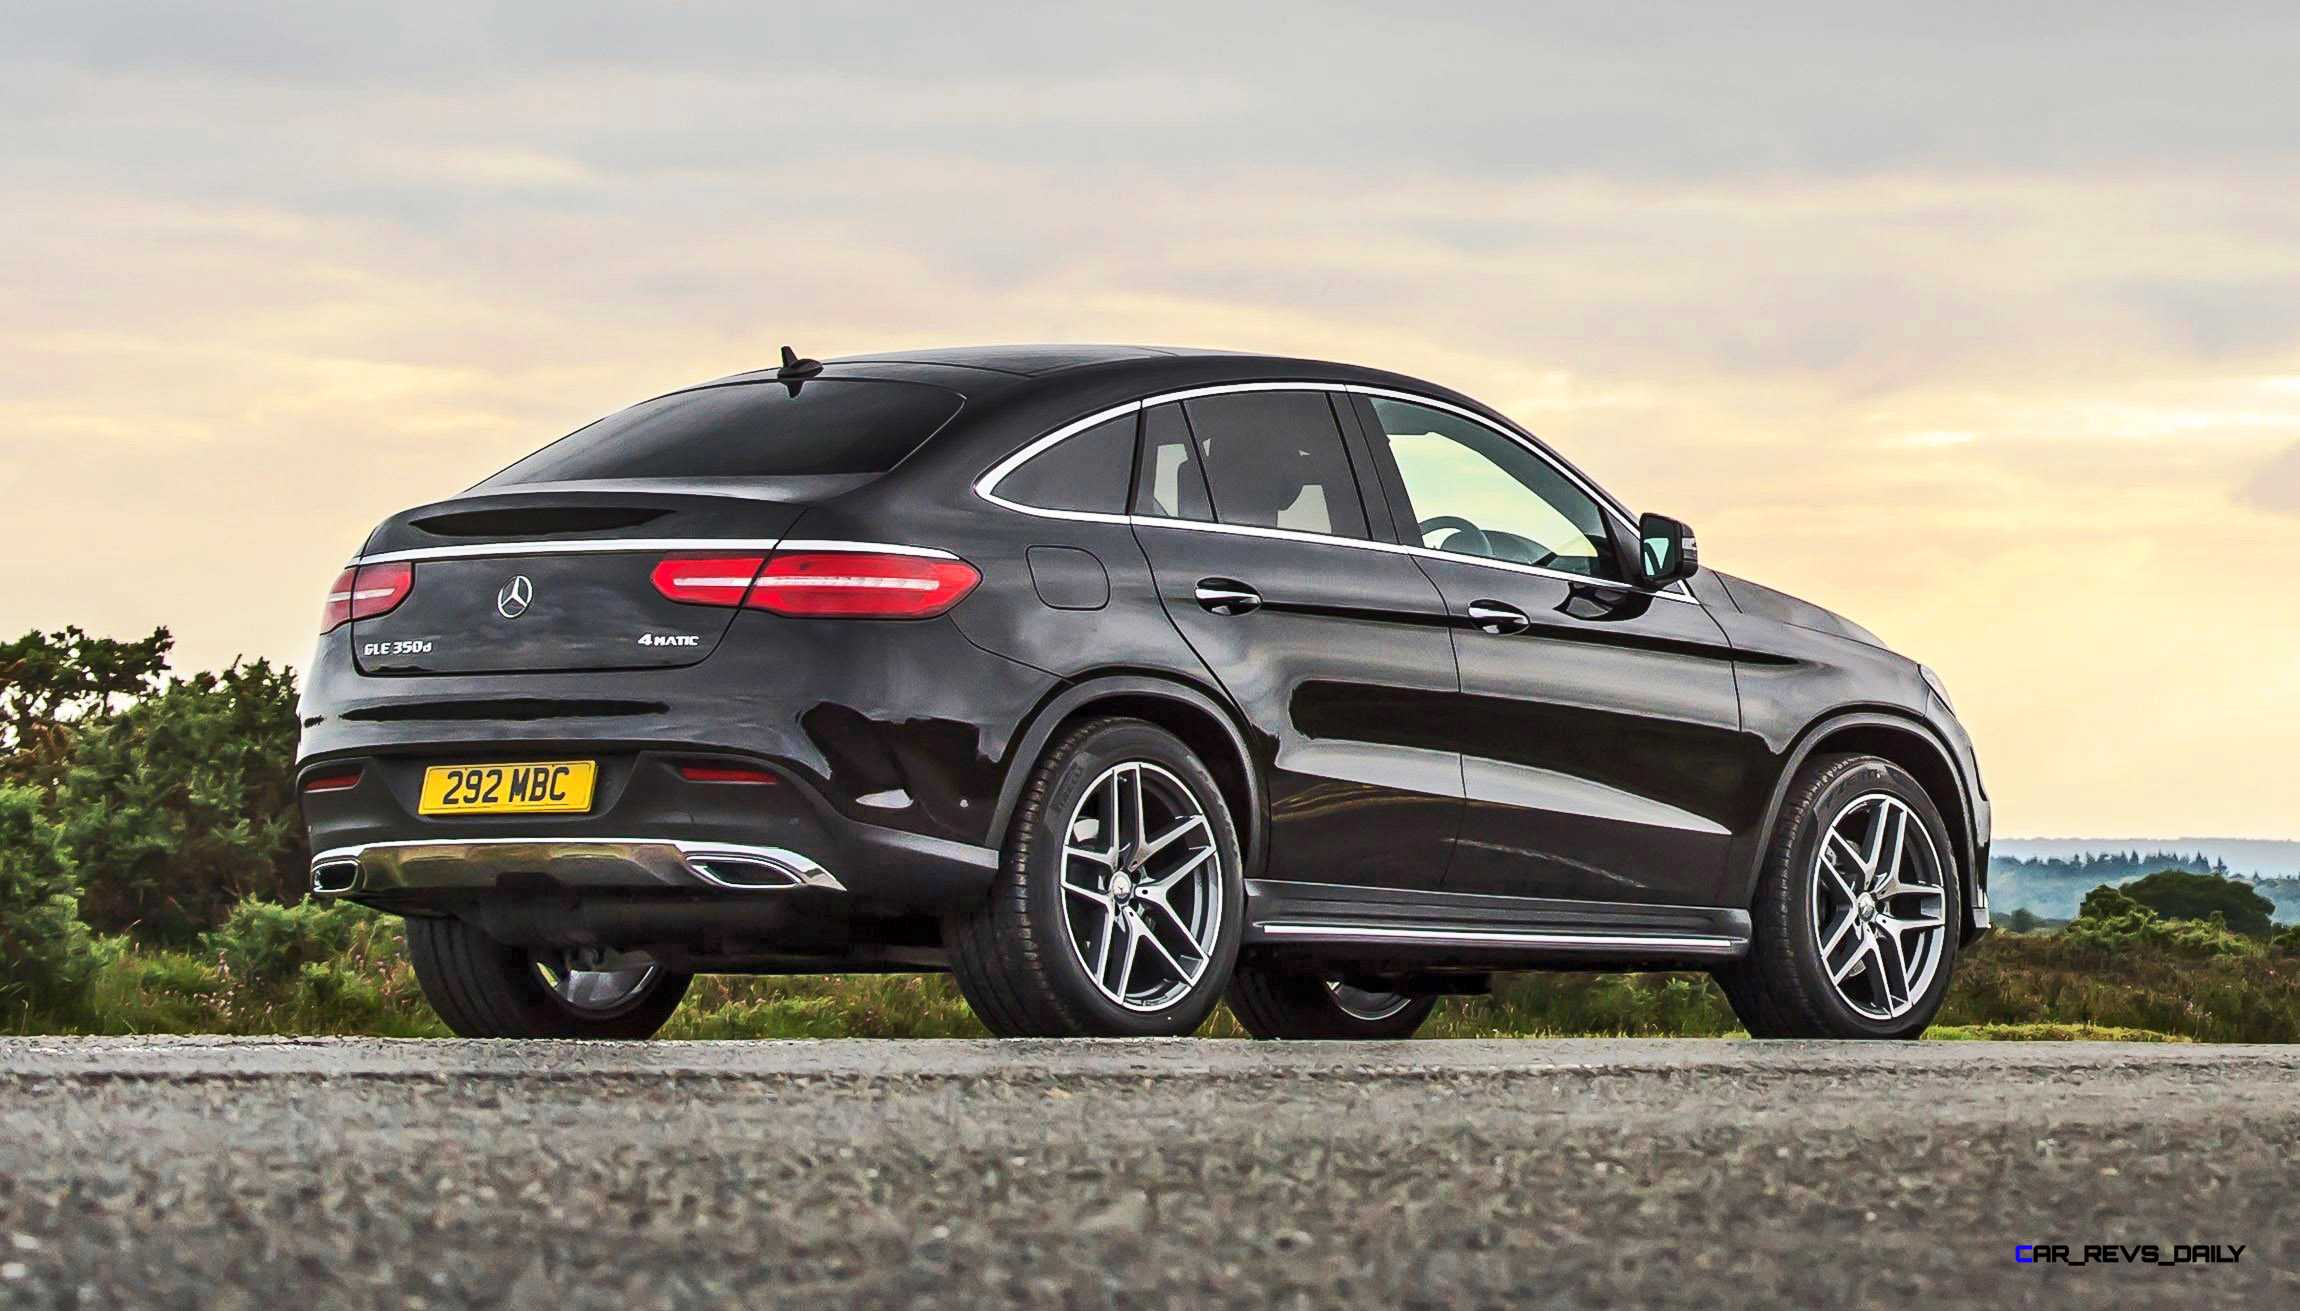 2016 Mercedes-Benz GLE Coupe in 40 New Photos - Previews GLE400 Twin Turbo